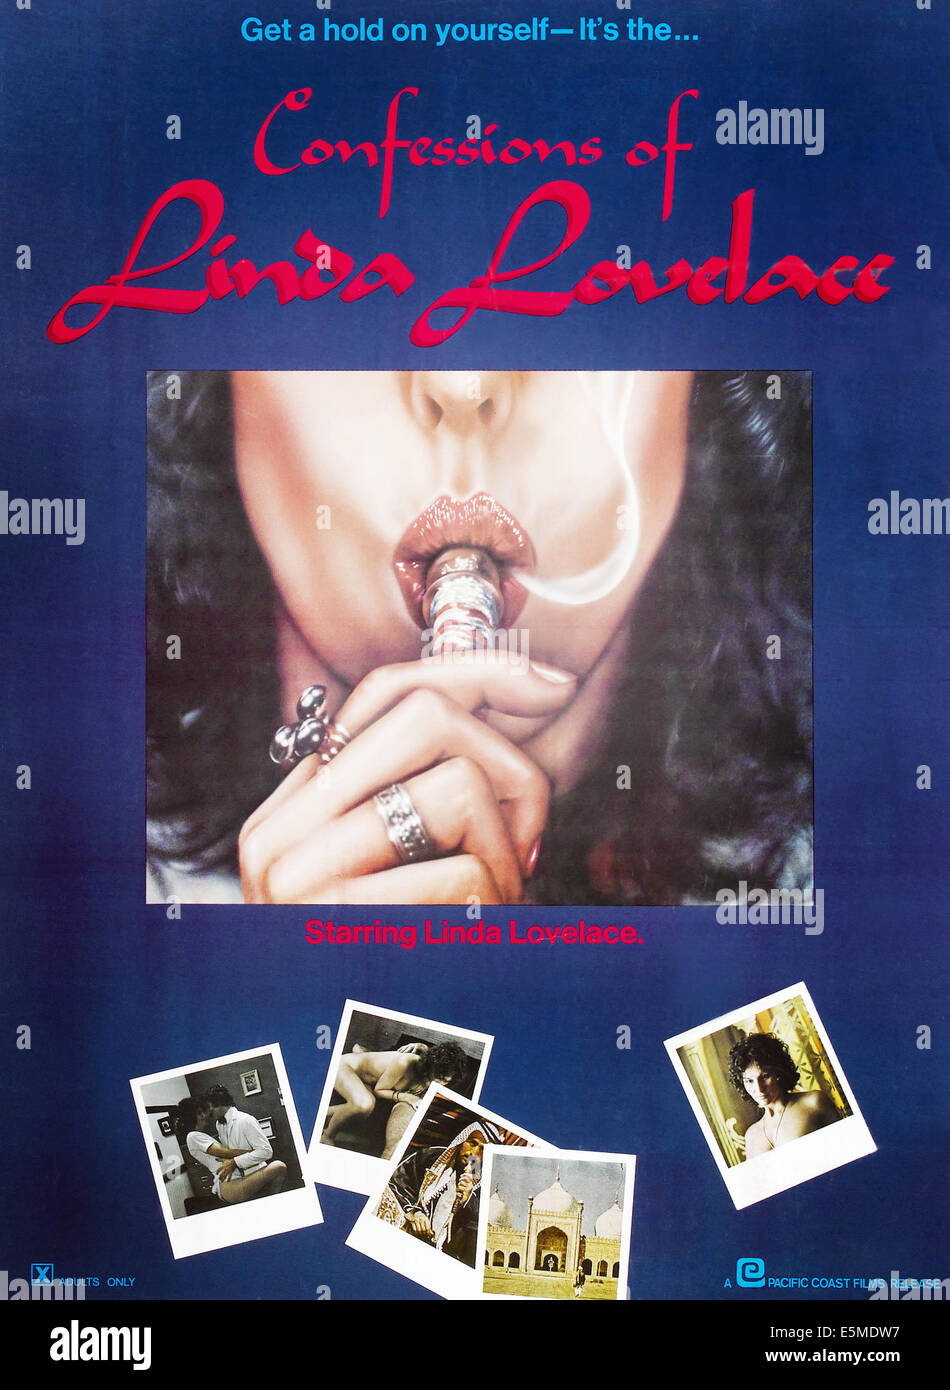 The confessions of linda lovelace